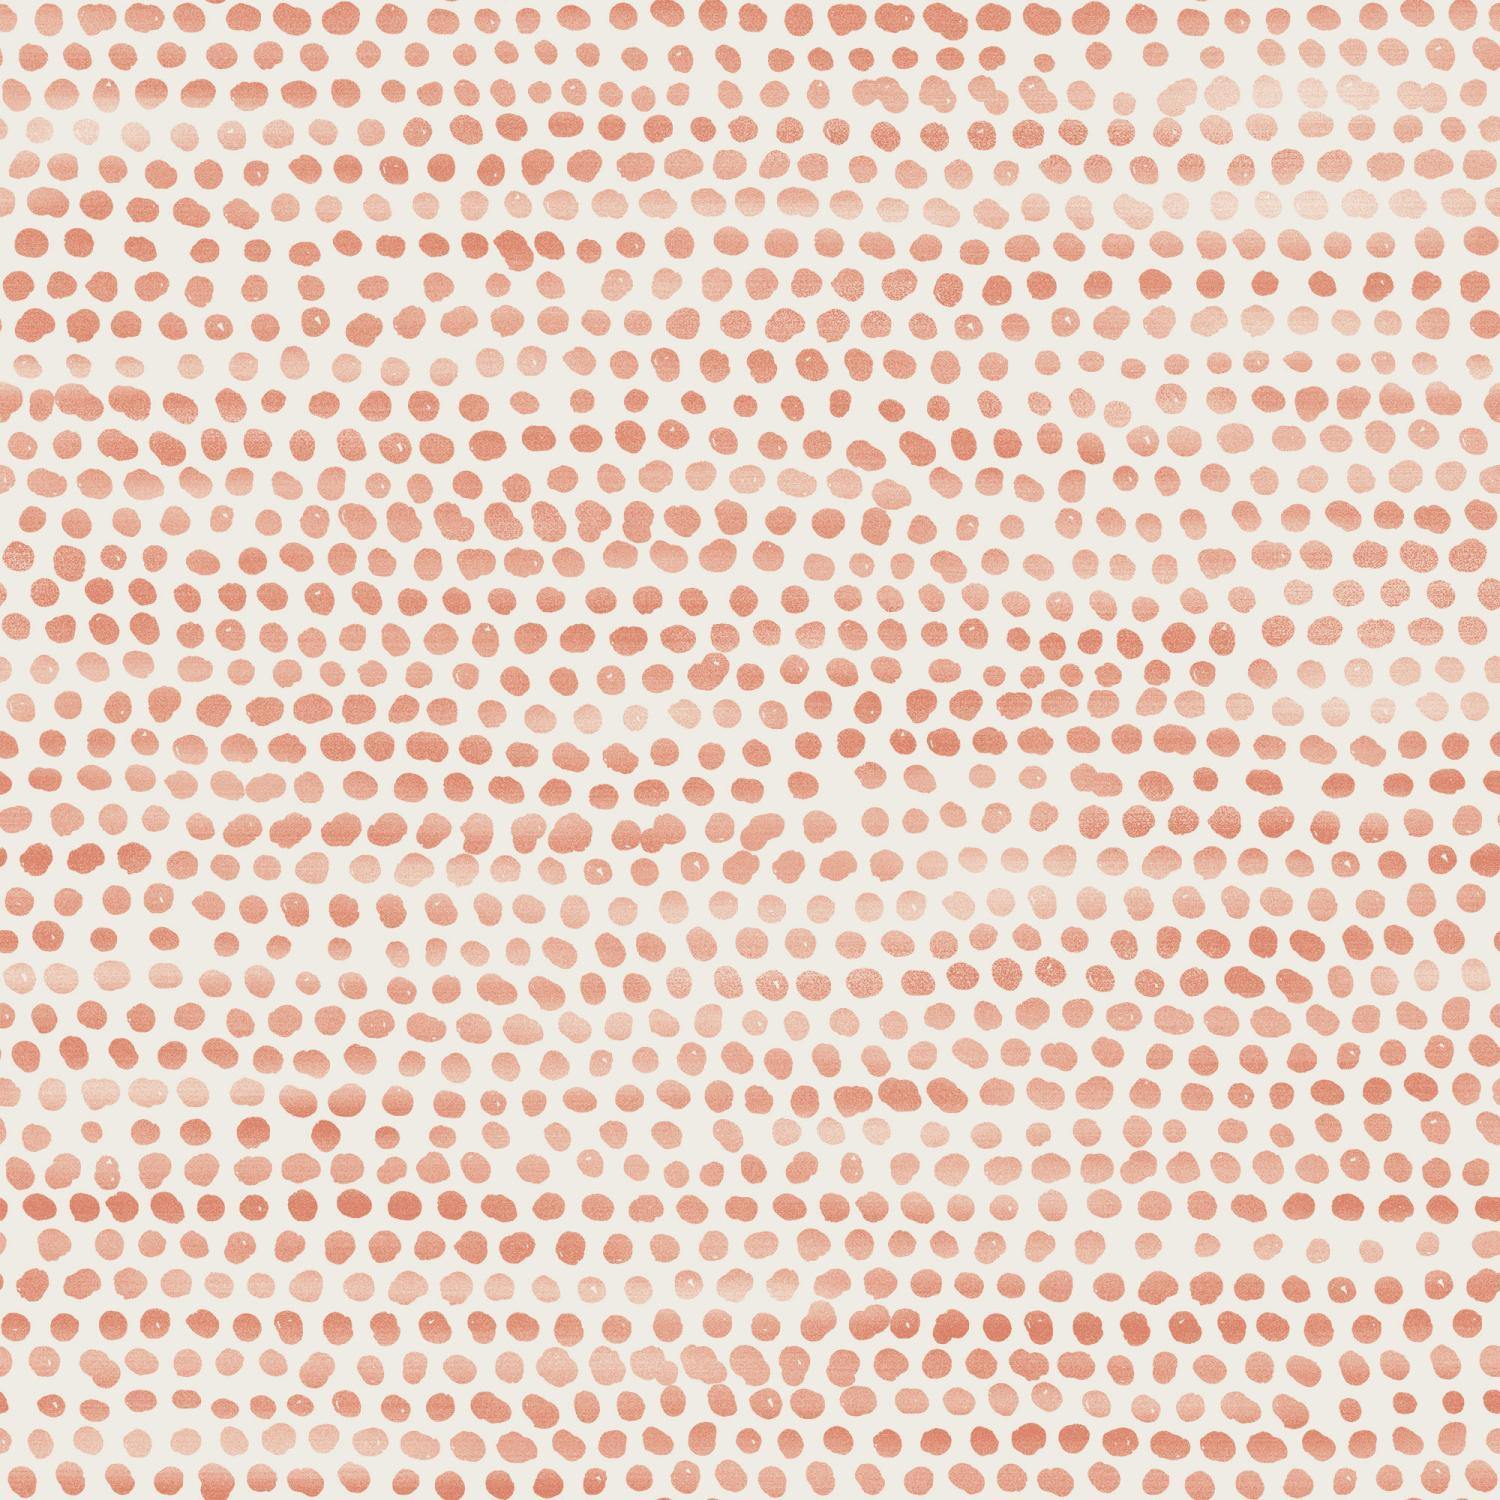 Tempaper Designs LIFESTYLE - Moire Dots Coral Peel and Stick Wallpaper